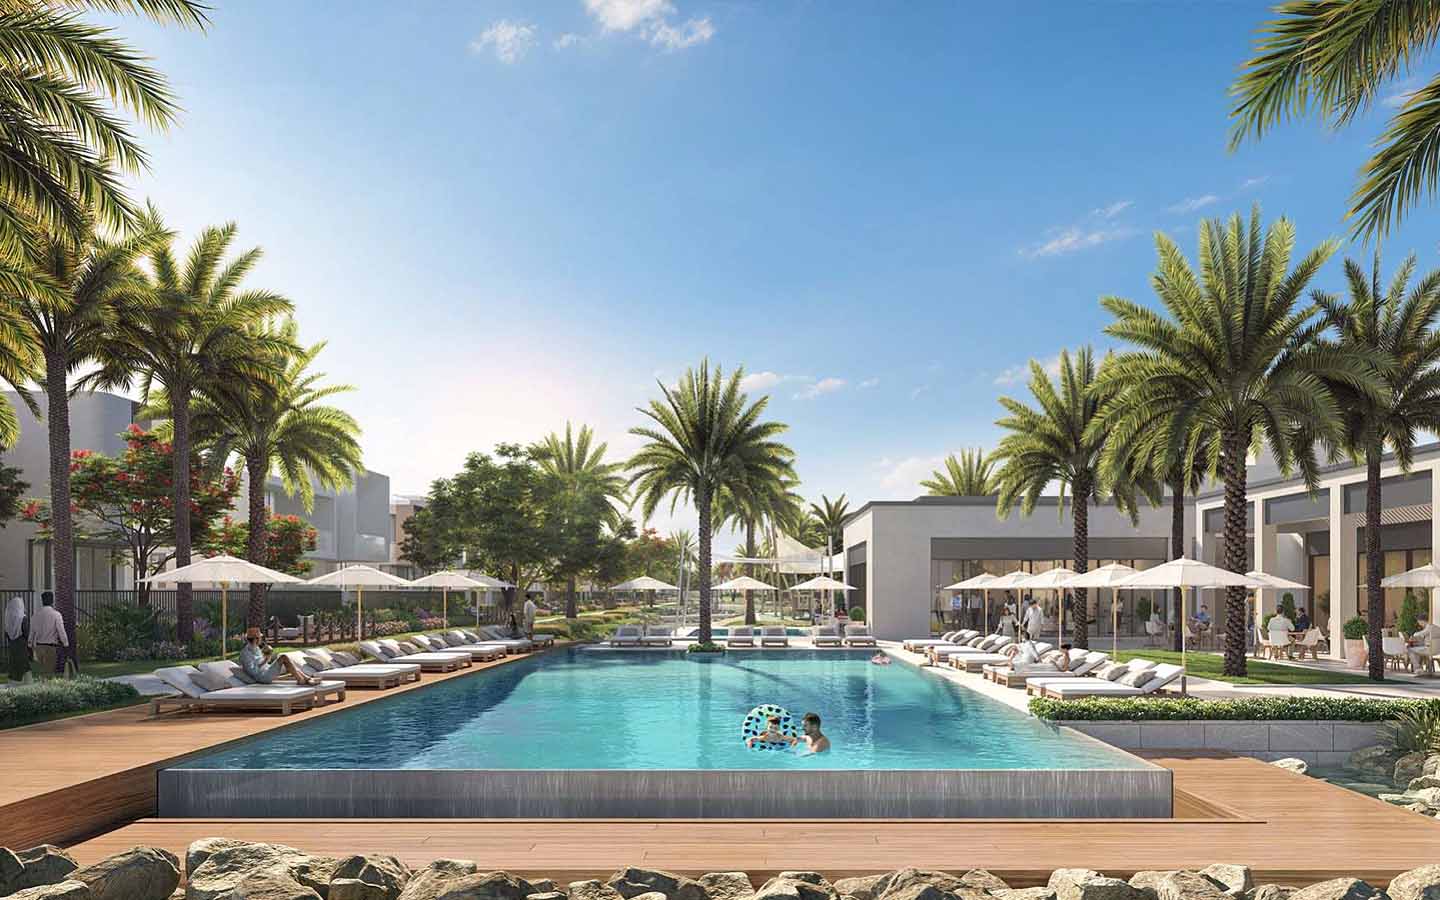 the luxury villa project will be completed in 2026